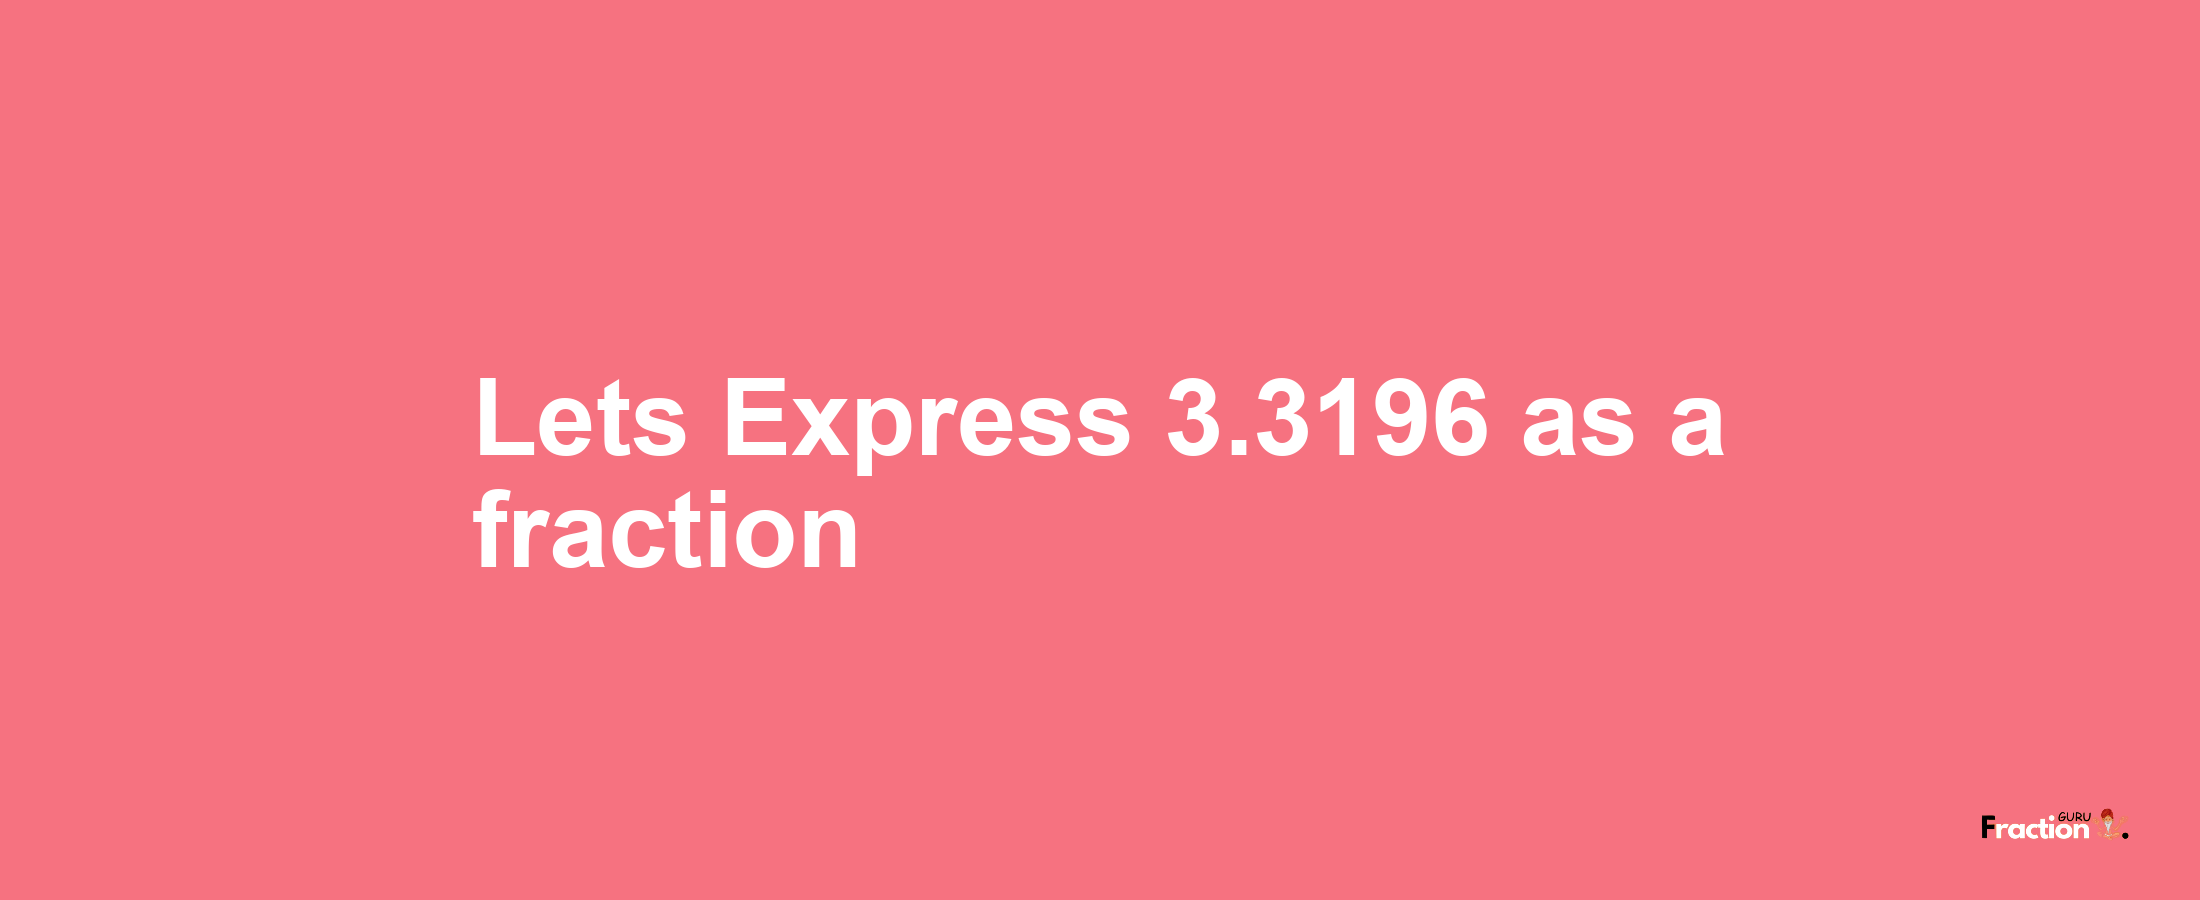 Lets Express 3.3196 as afraction